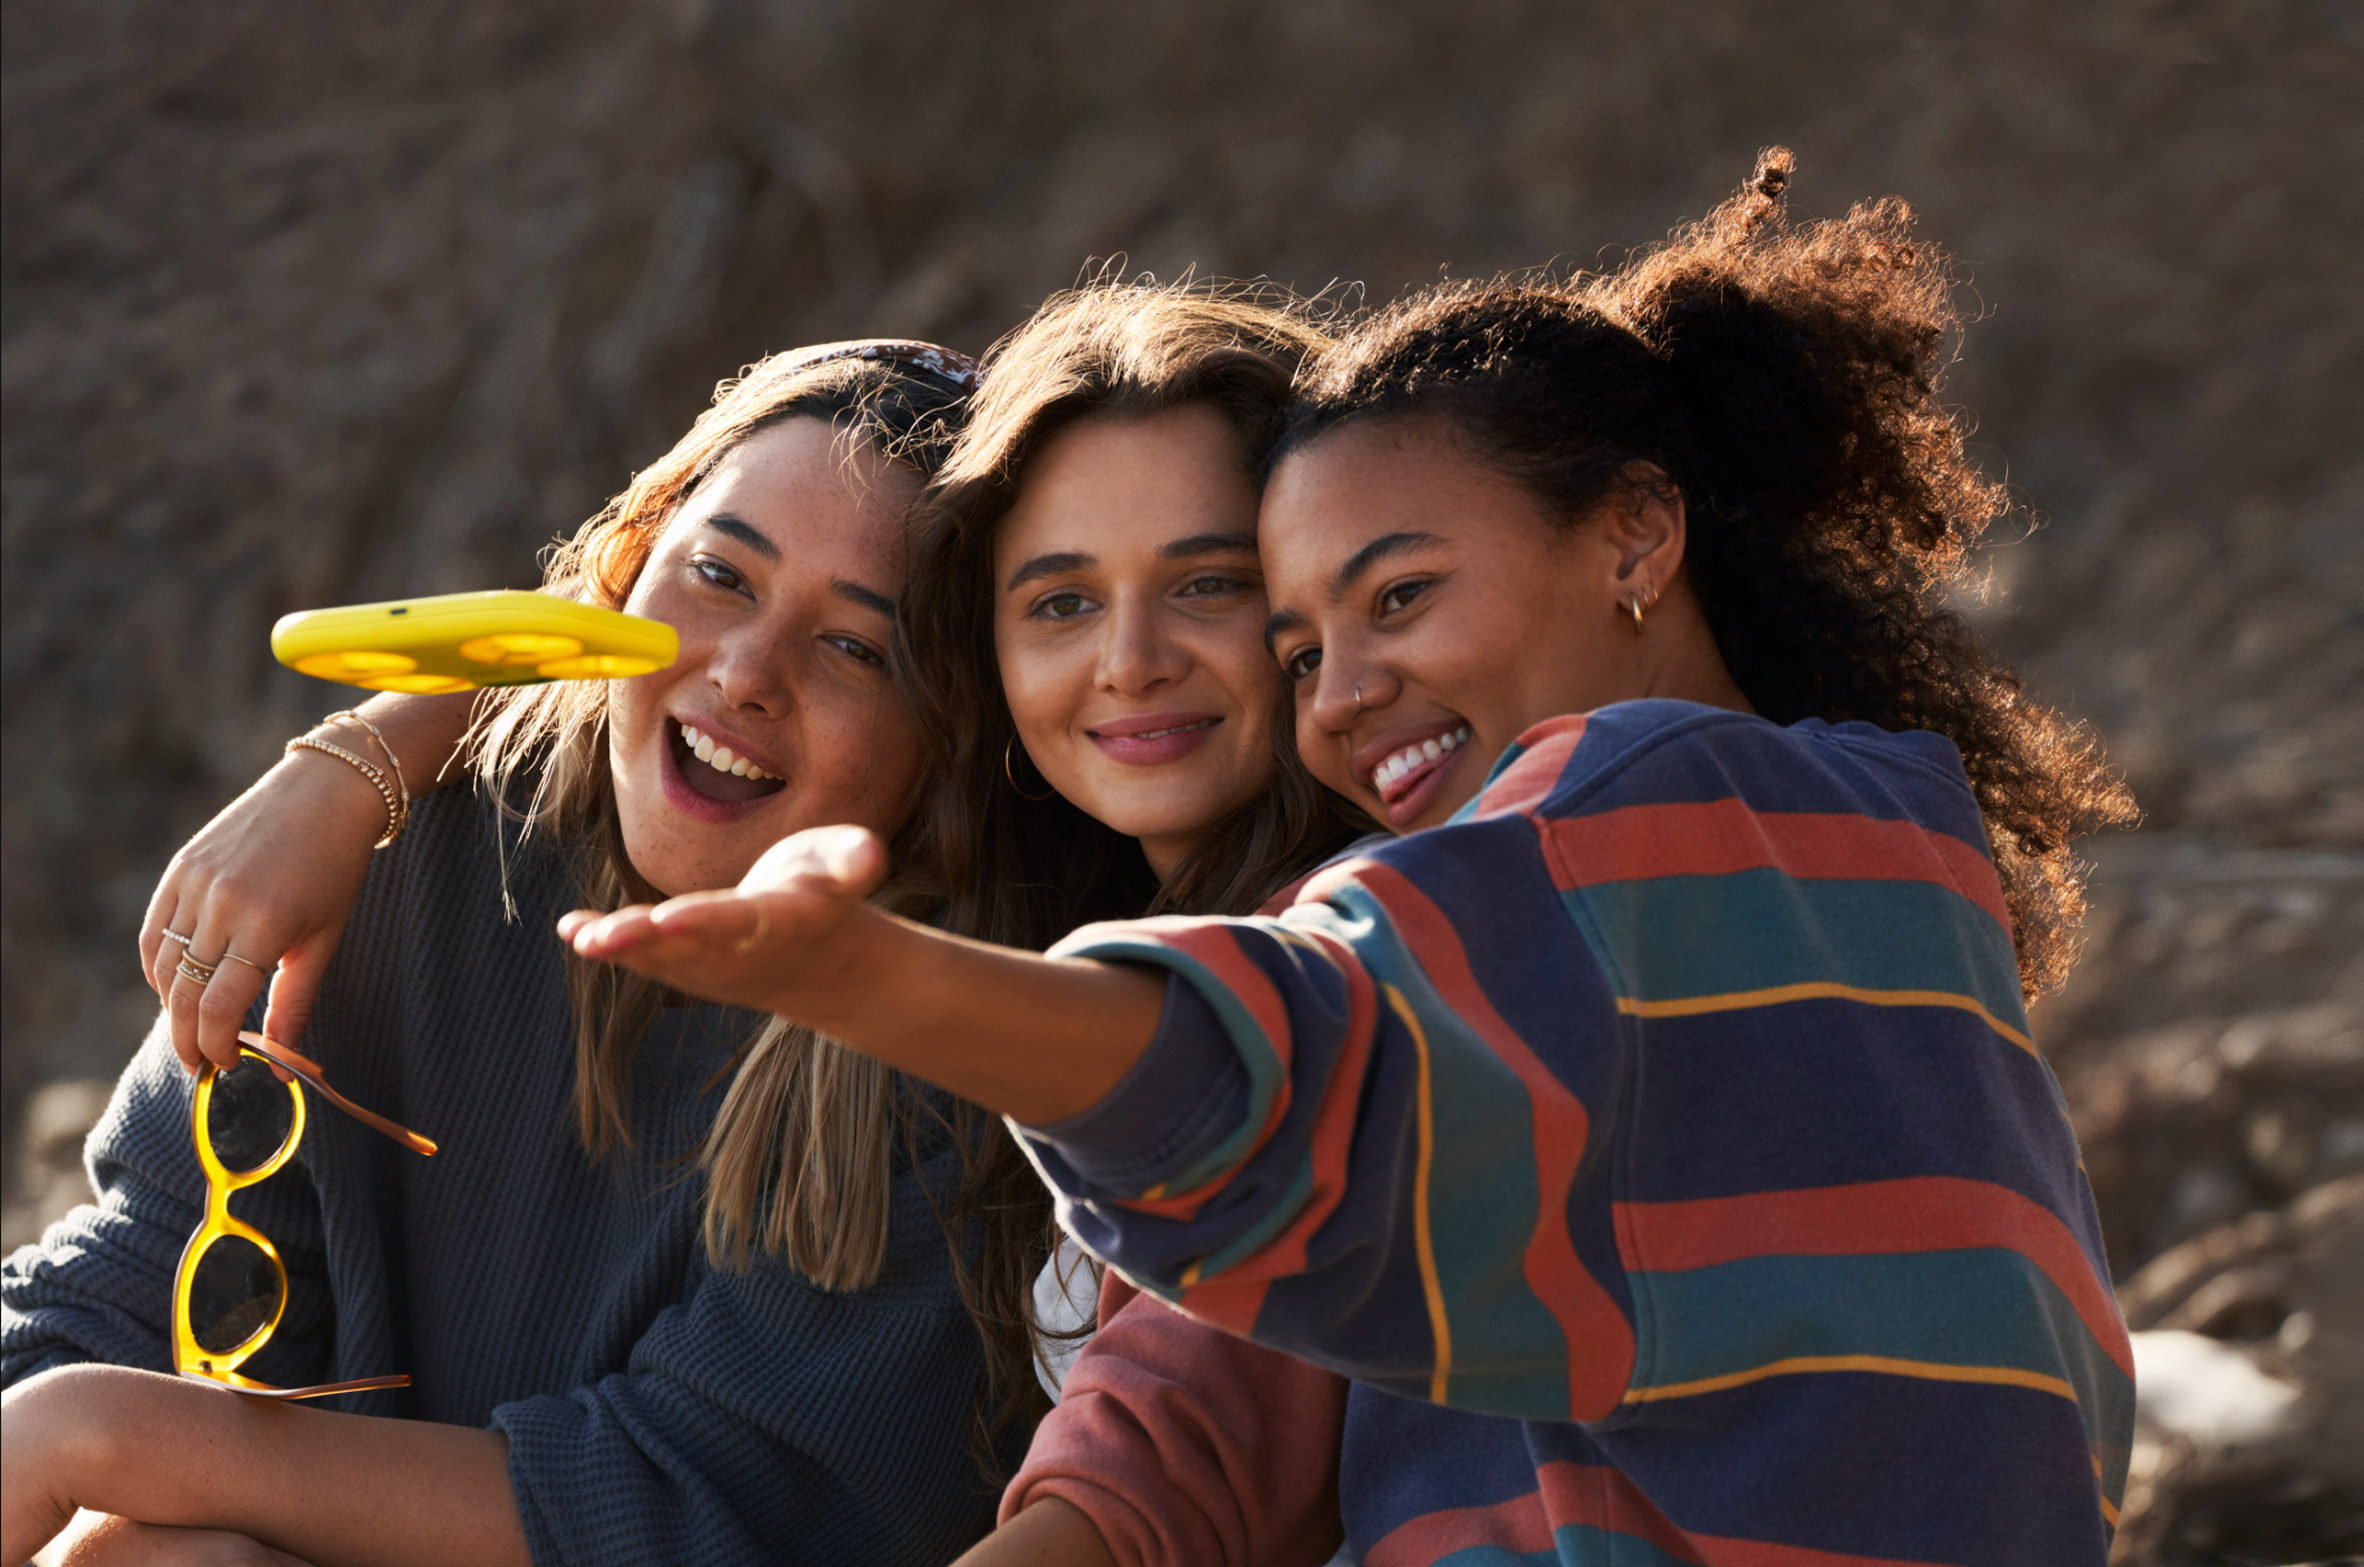 Free Photos - A Cheerful Moment Shared By Three Women As They Pose Together  For A Photo. They Are All Smiling, Creating A Warm And Friendly Atmosphere.  The Portrait Appears Casual, Suggesting